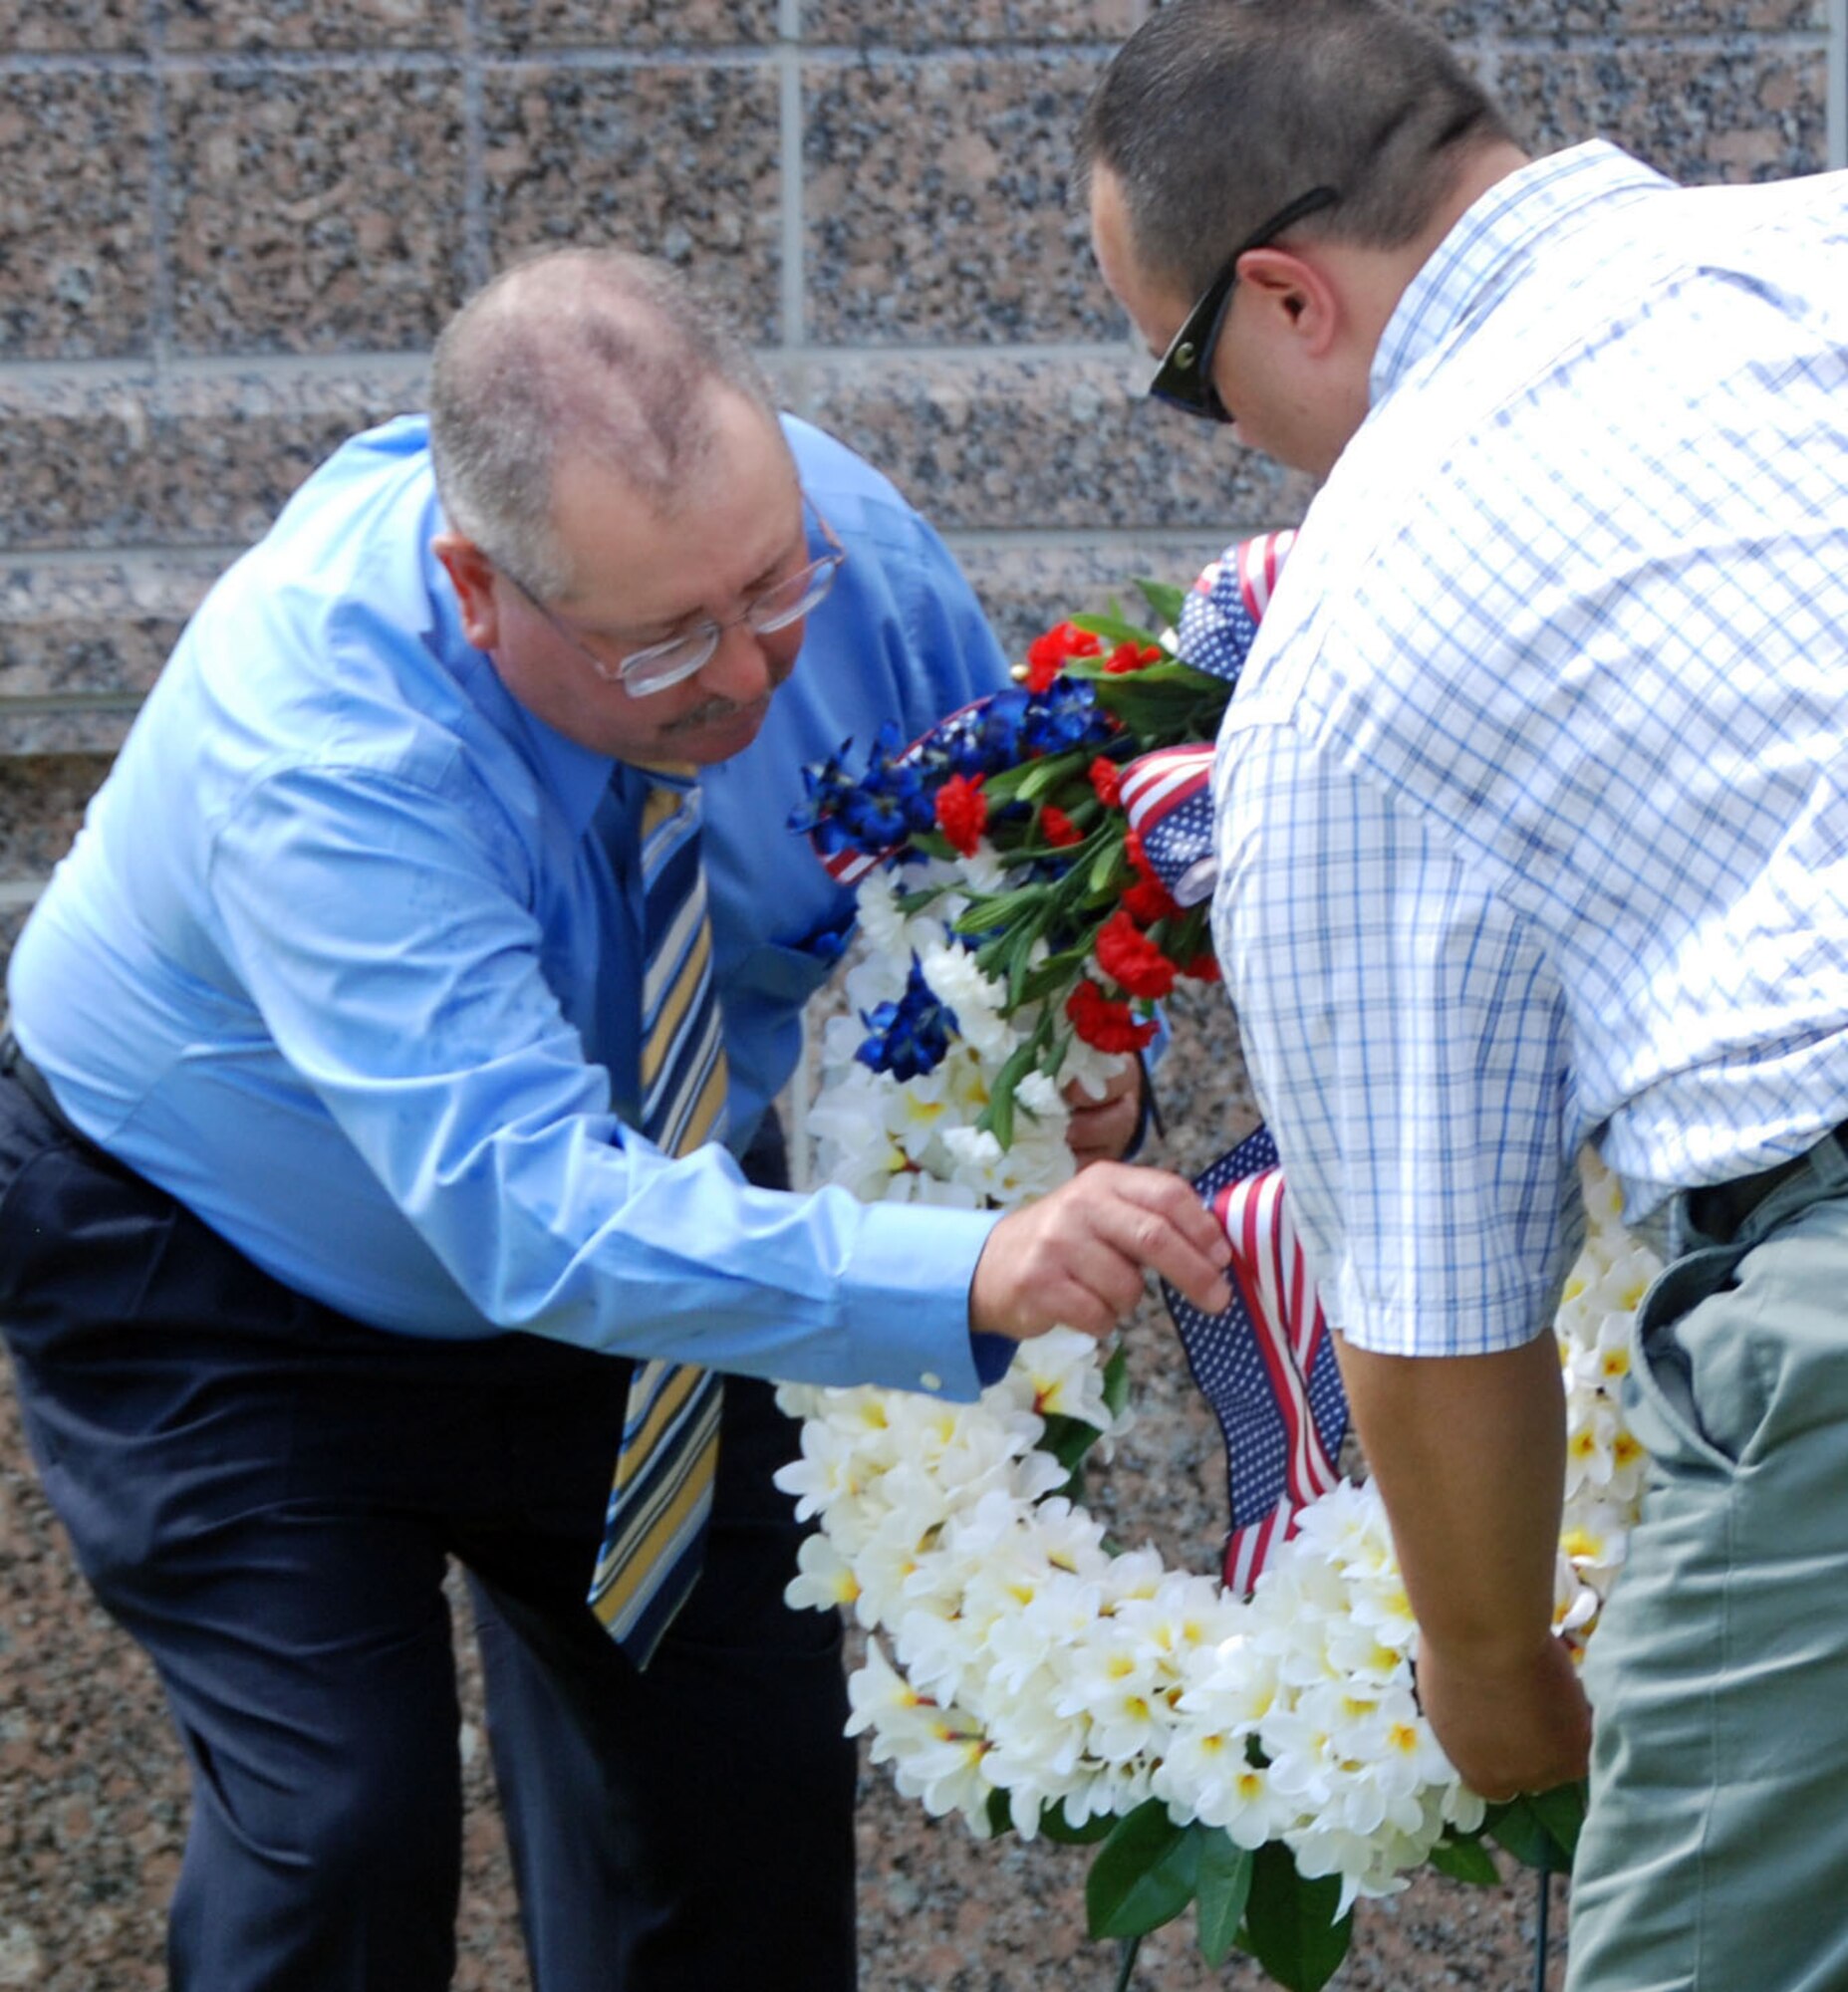 PATRICK AIR FORCE BASE, Fla. - Tech. Sgt. Robert Hudgins (Ret.) and Mr. Darrell Hankins, from 920th Rescue Wing here prepare to lay a wreath during a memorial ceremony June 25 at Memorial Plaza here held to honor five fallen Airmen who were killed in the 1996 Khobar Towers bombing in Saudia Arabia. (U.S. Air Force Photo/Tech Sgt Kristin Mack)